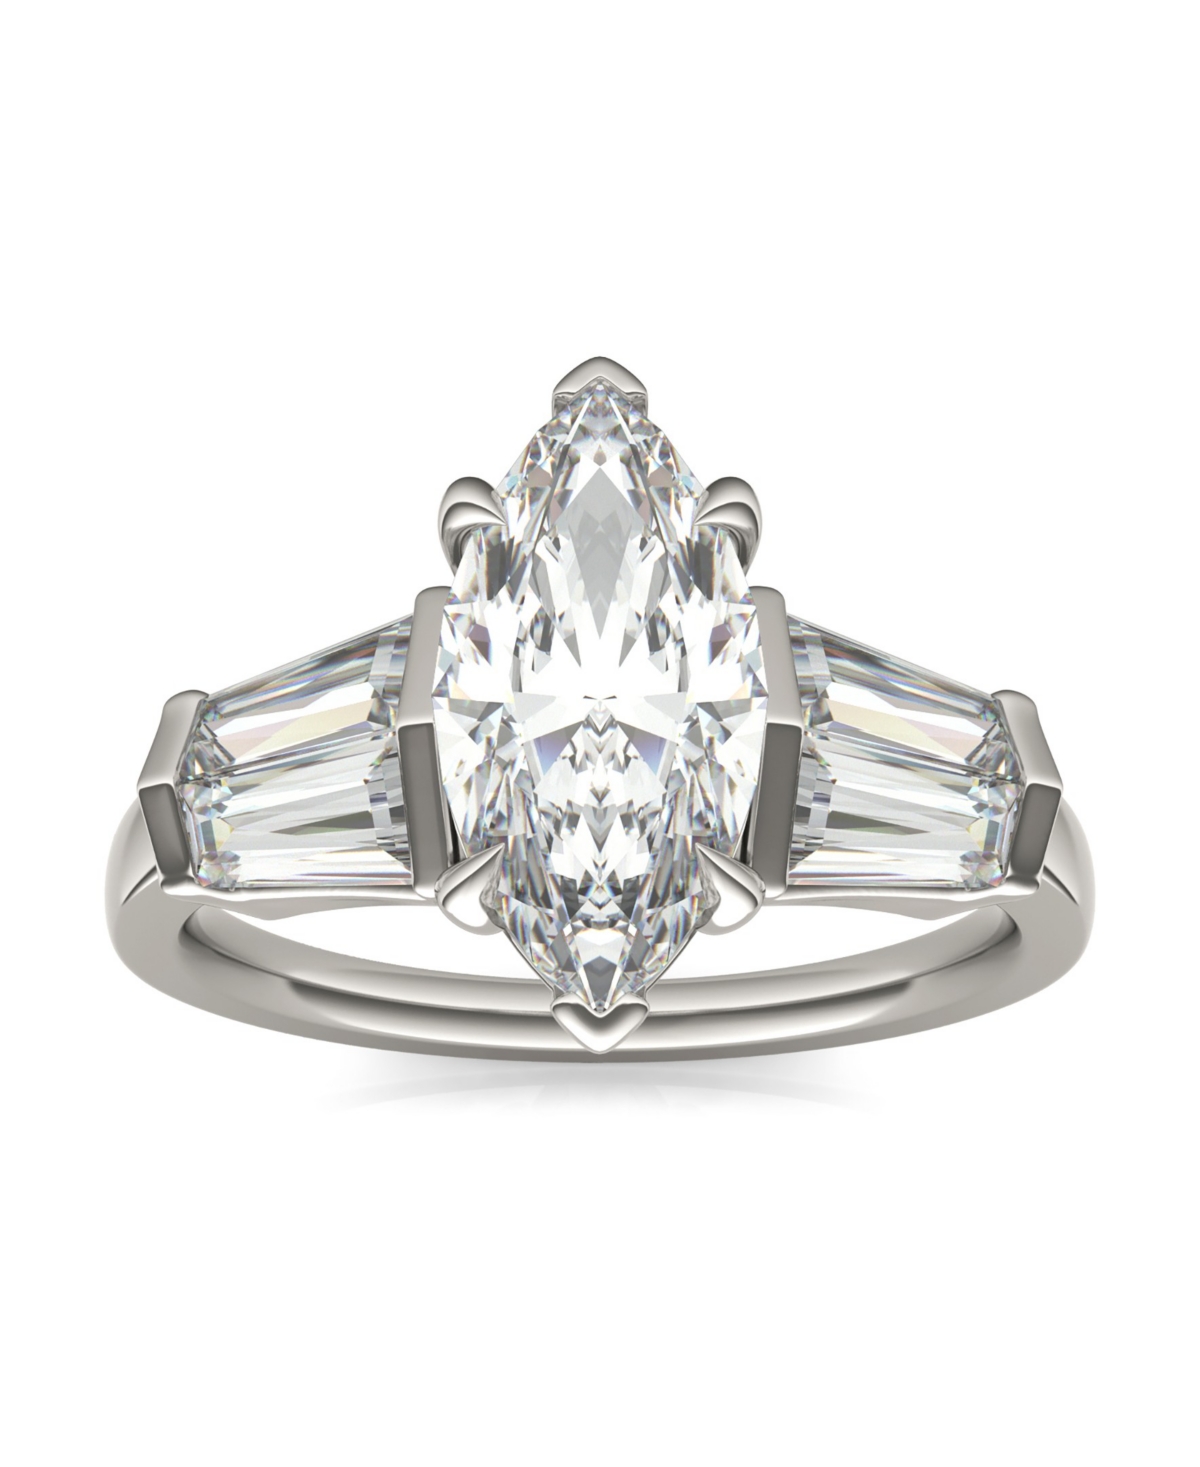 Charles & Colvard Moissanite Marquise Engagement Ring (3-1/3 Carat Total Weight Diamond Equivalent) In 14k White Gold